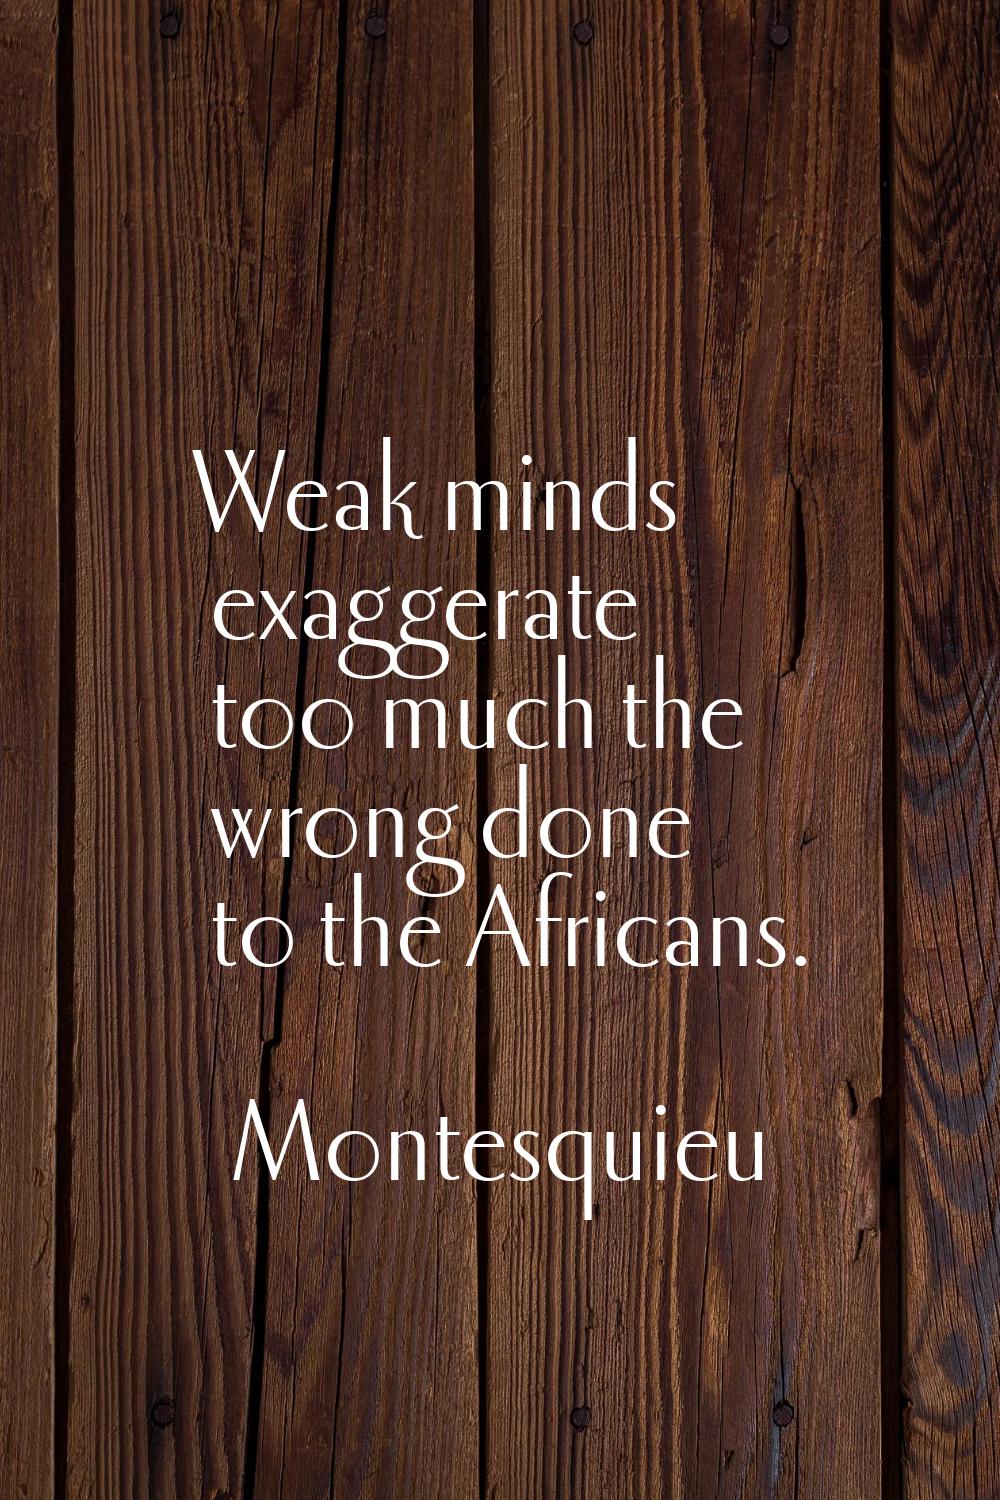 Weak minds exaggerate too much the wrong done to the Africans.